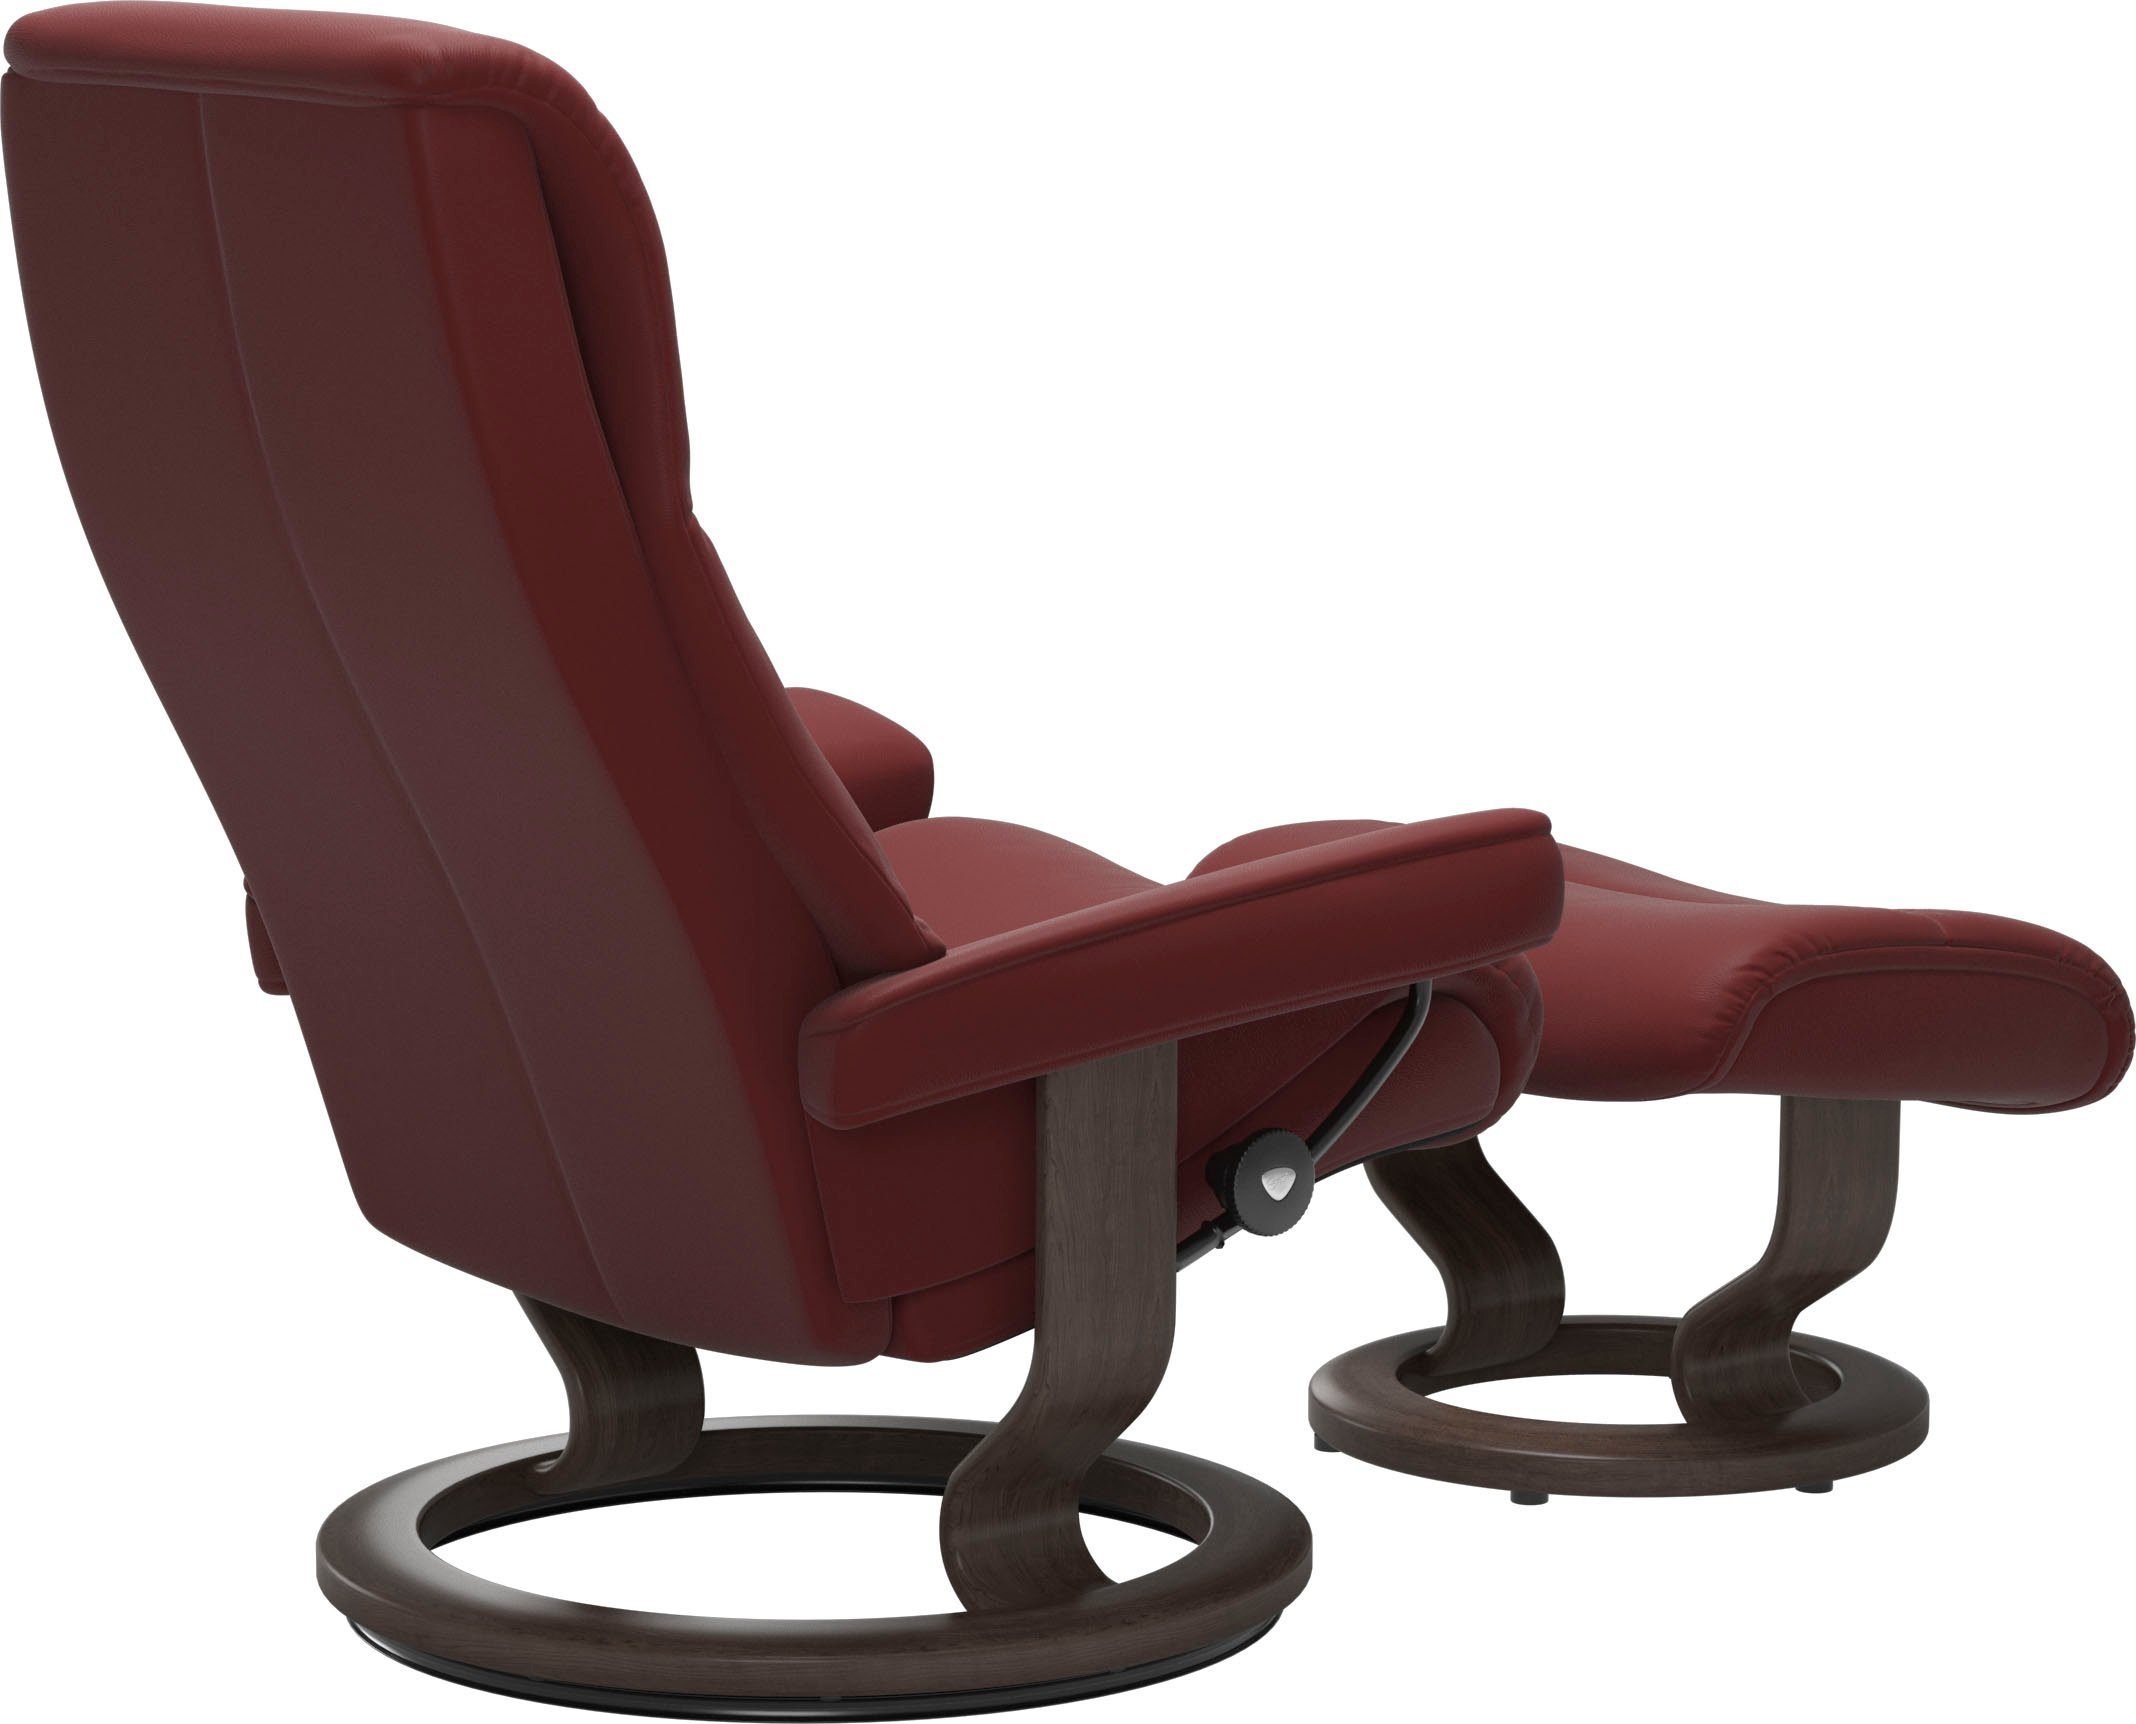 mit Relaxsessel View, Stressless® Classic Größe M,Gestell Base, Wenge